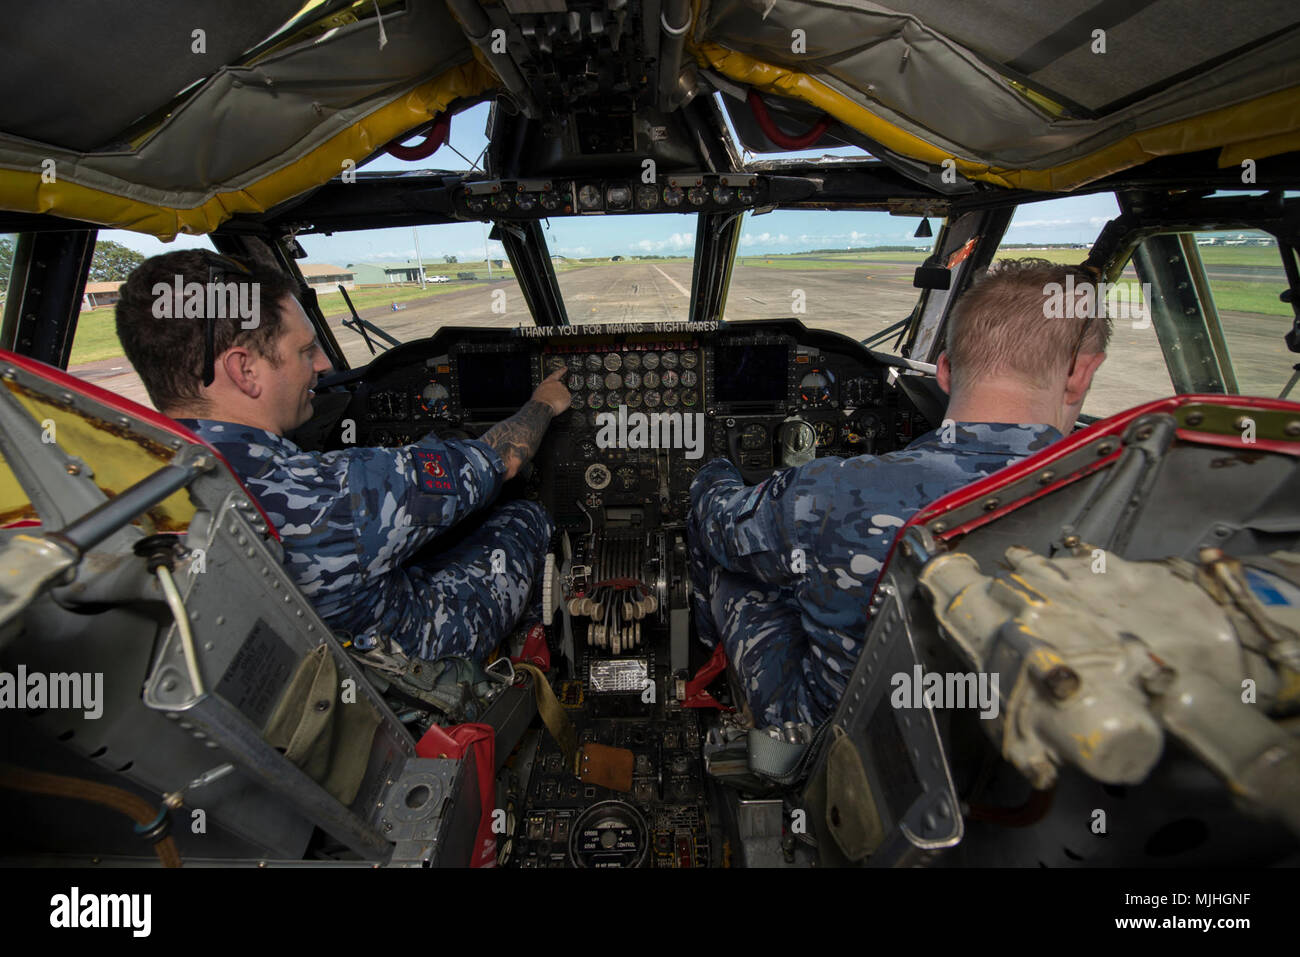 Royal Australian Air Force (RAAF) Flight Lieutenant Christian Pace (left), and Flying Officer Ben Rowe, both air traffic controllers assigned to 452nd Squadron, explore the cockpit of a B-52H Stratofortress at RAAF Base Darwin, Australia, April 6, 2018. A detachment of U.S. Air Force B-52H bombers, aircrew and support personnel deployed to RAAF Darwin to enable the U.S. to train and increase interoperability with Australian joint terminal attack controllers as part of the U.S. Pacific Command’s Enhanced Air Cooperation program, which builds on air exercises and training between the two air for Stock Photo